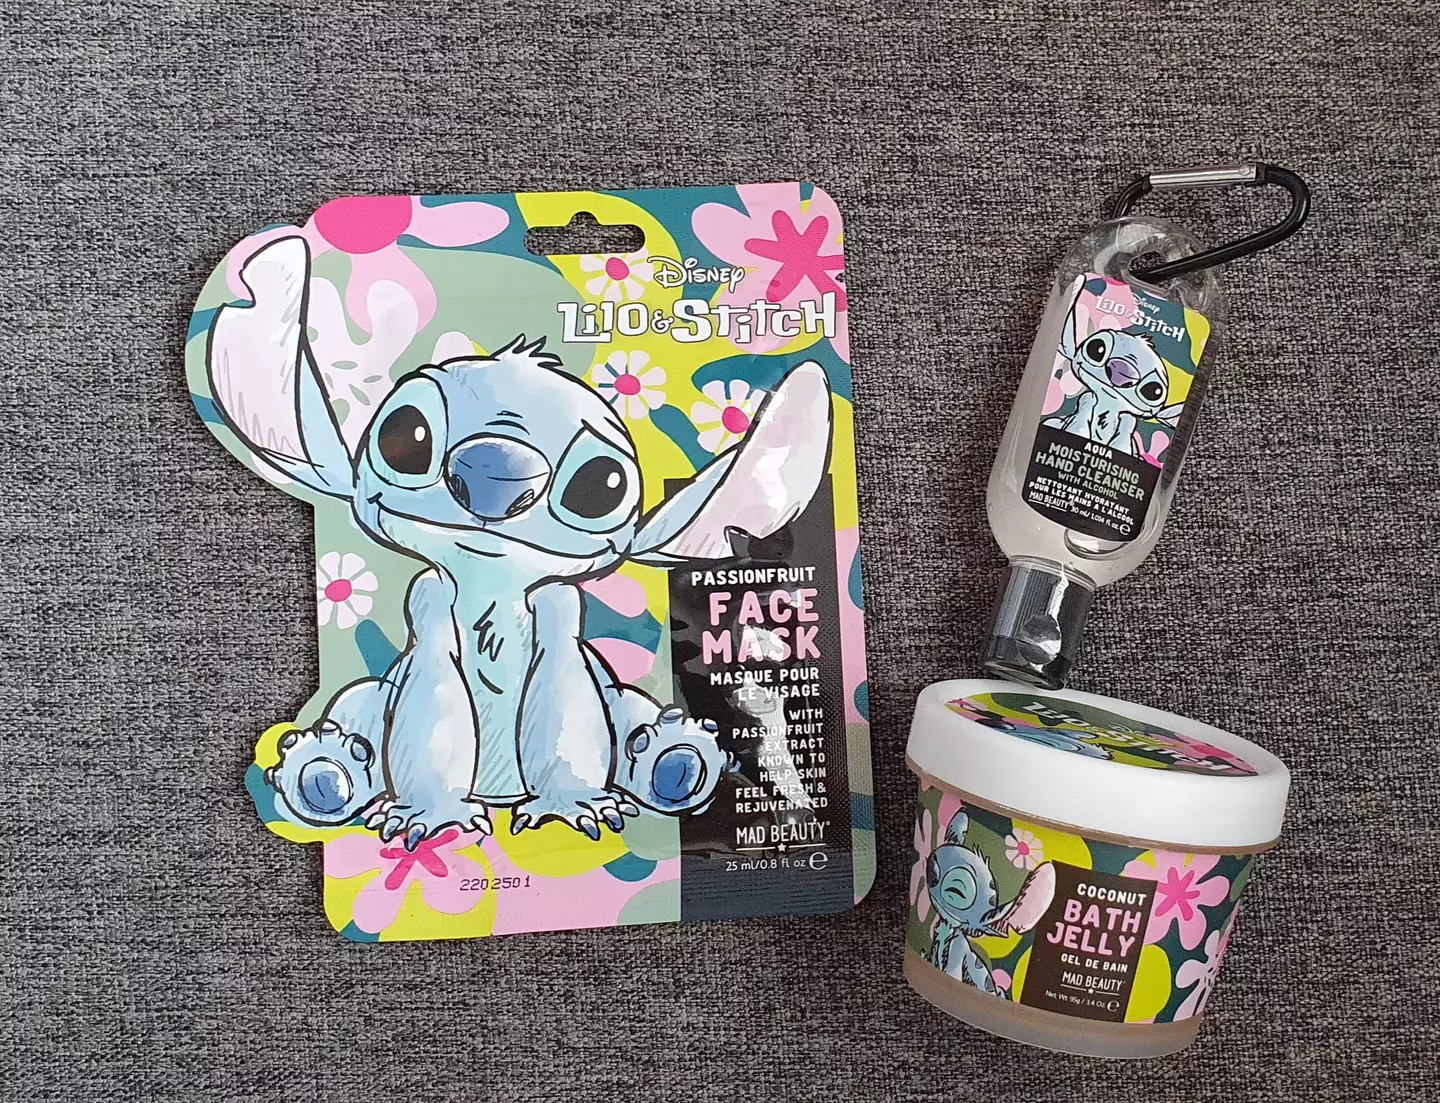 Shannon had ordered some Disney toiletries.